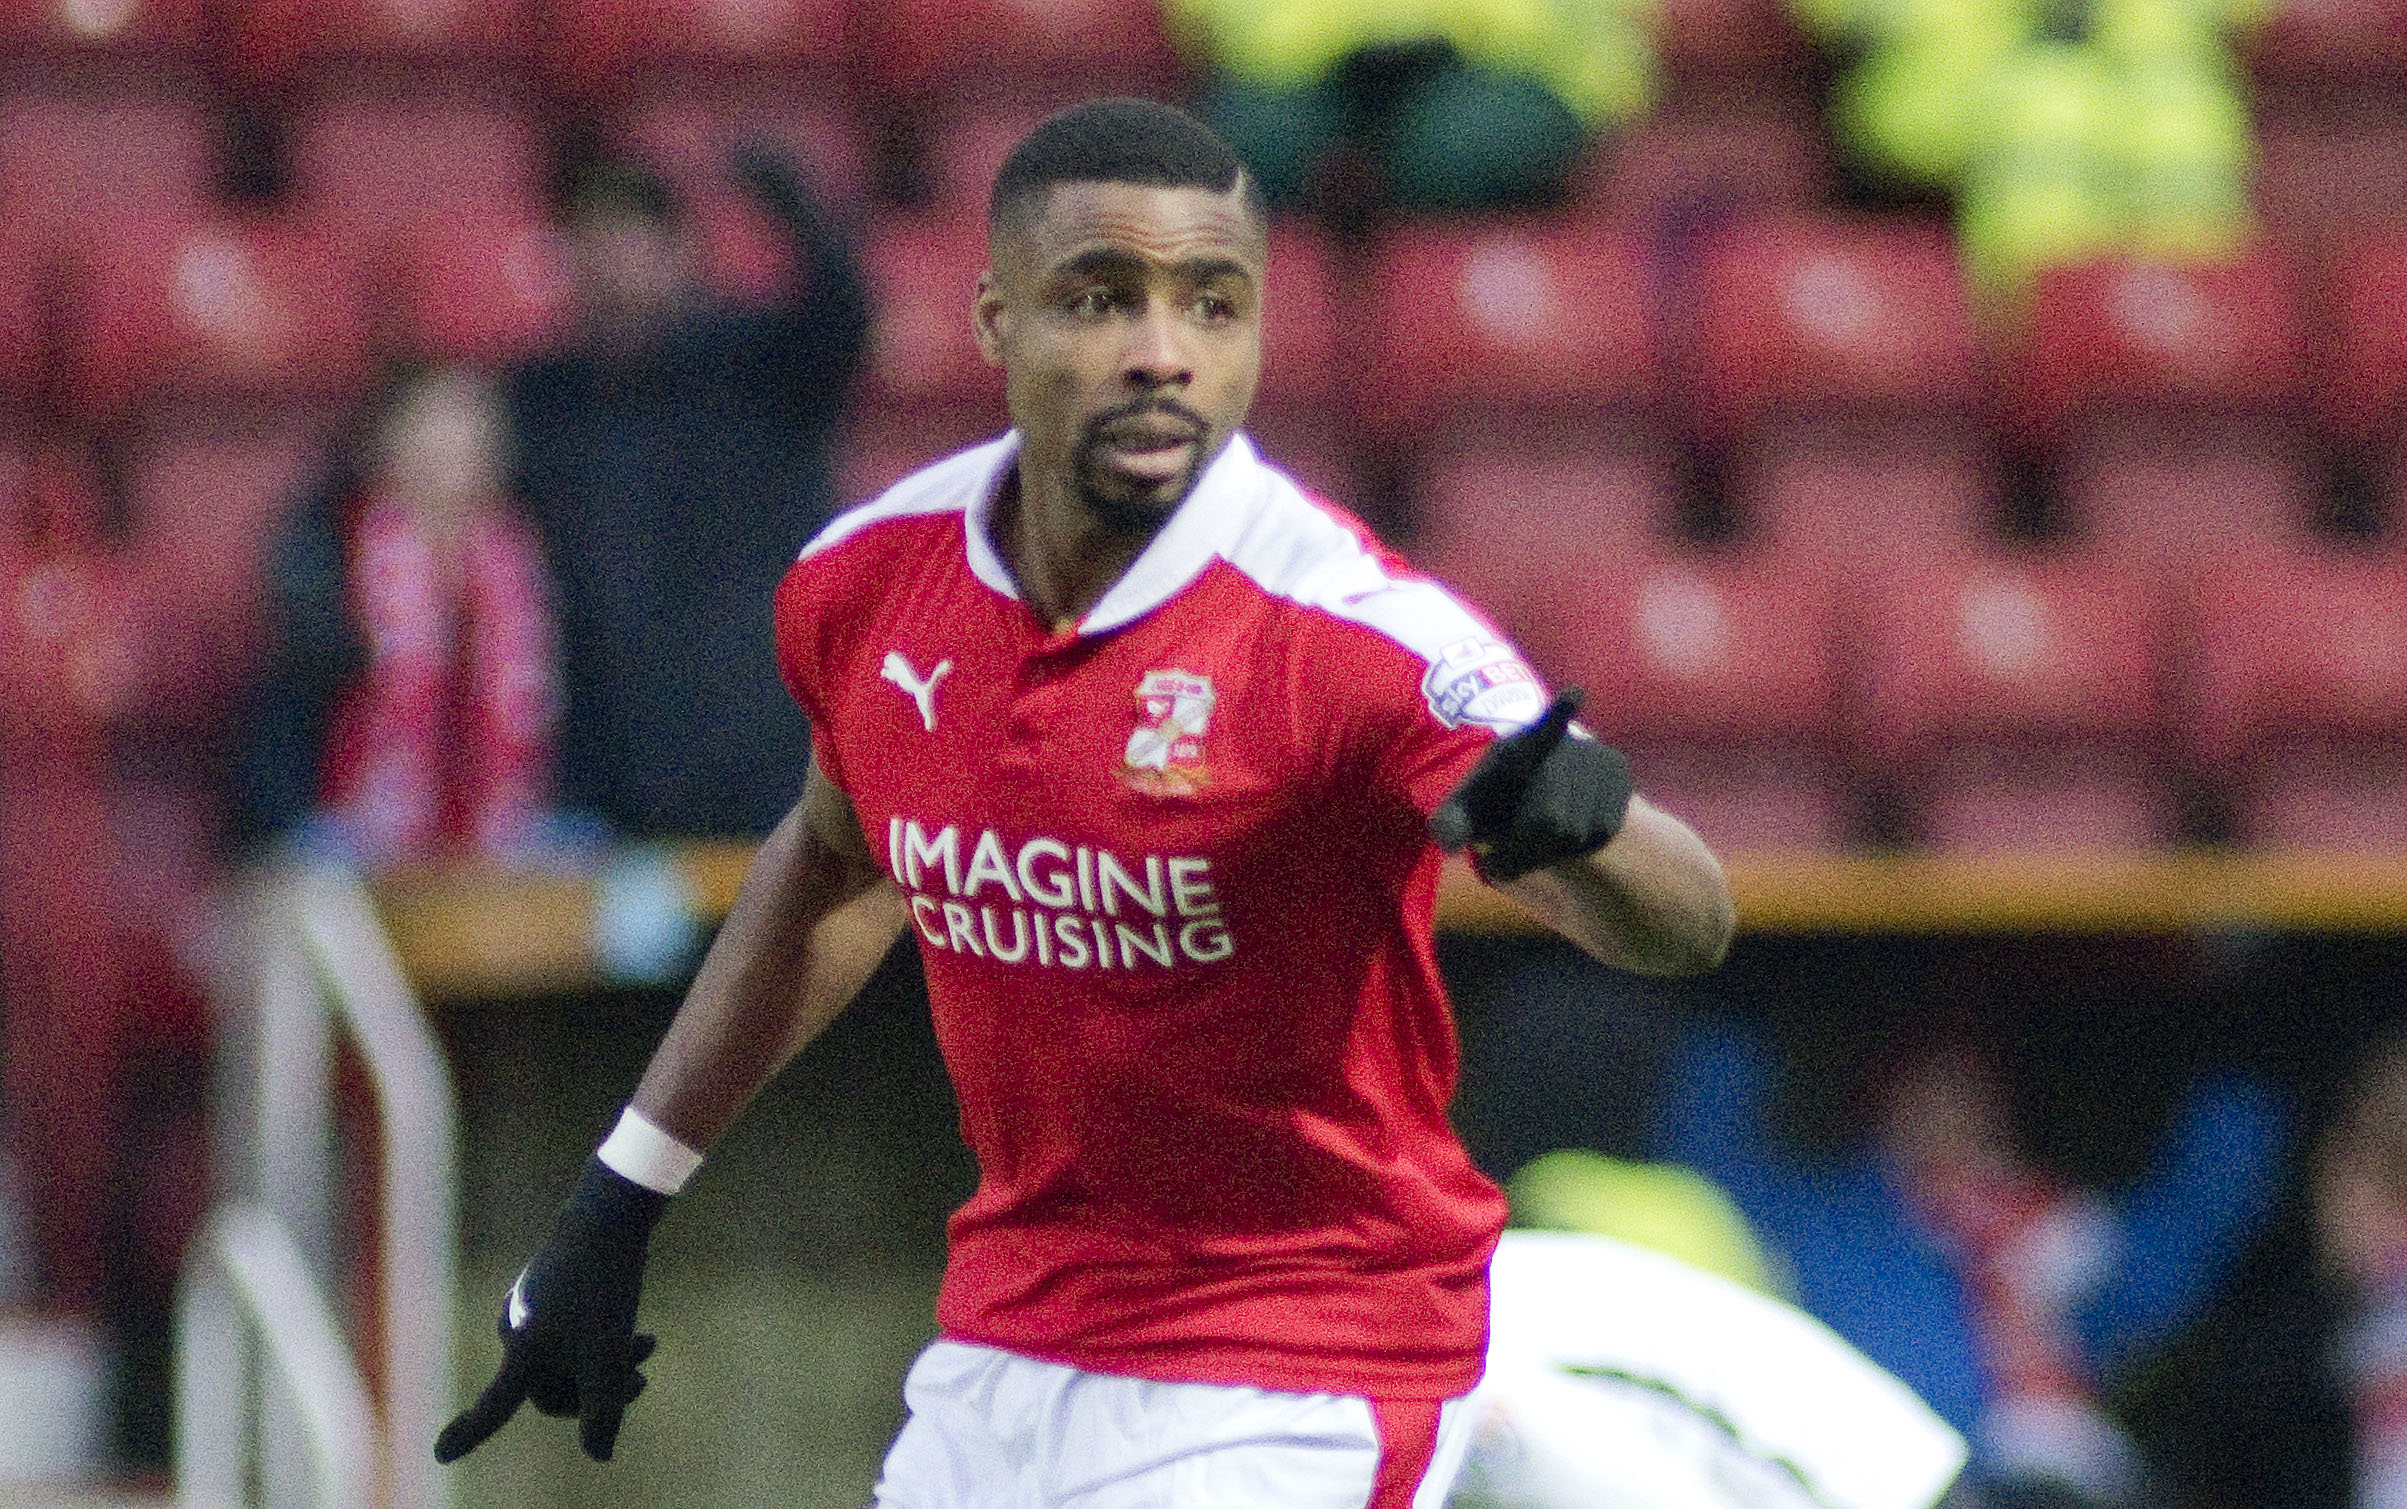 Jon Obika named STFC supporter's player of the year